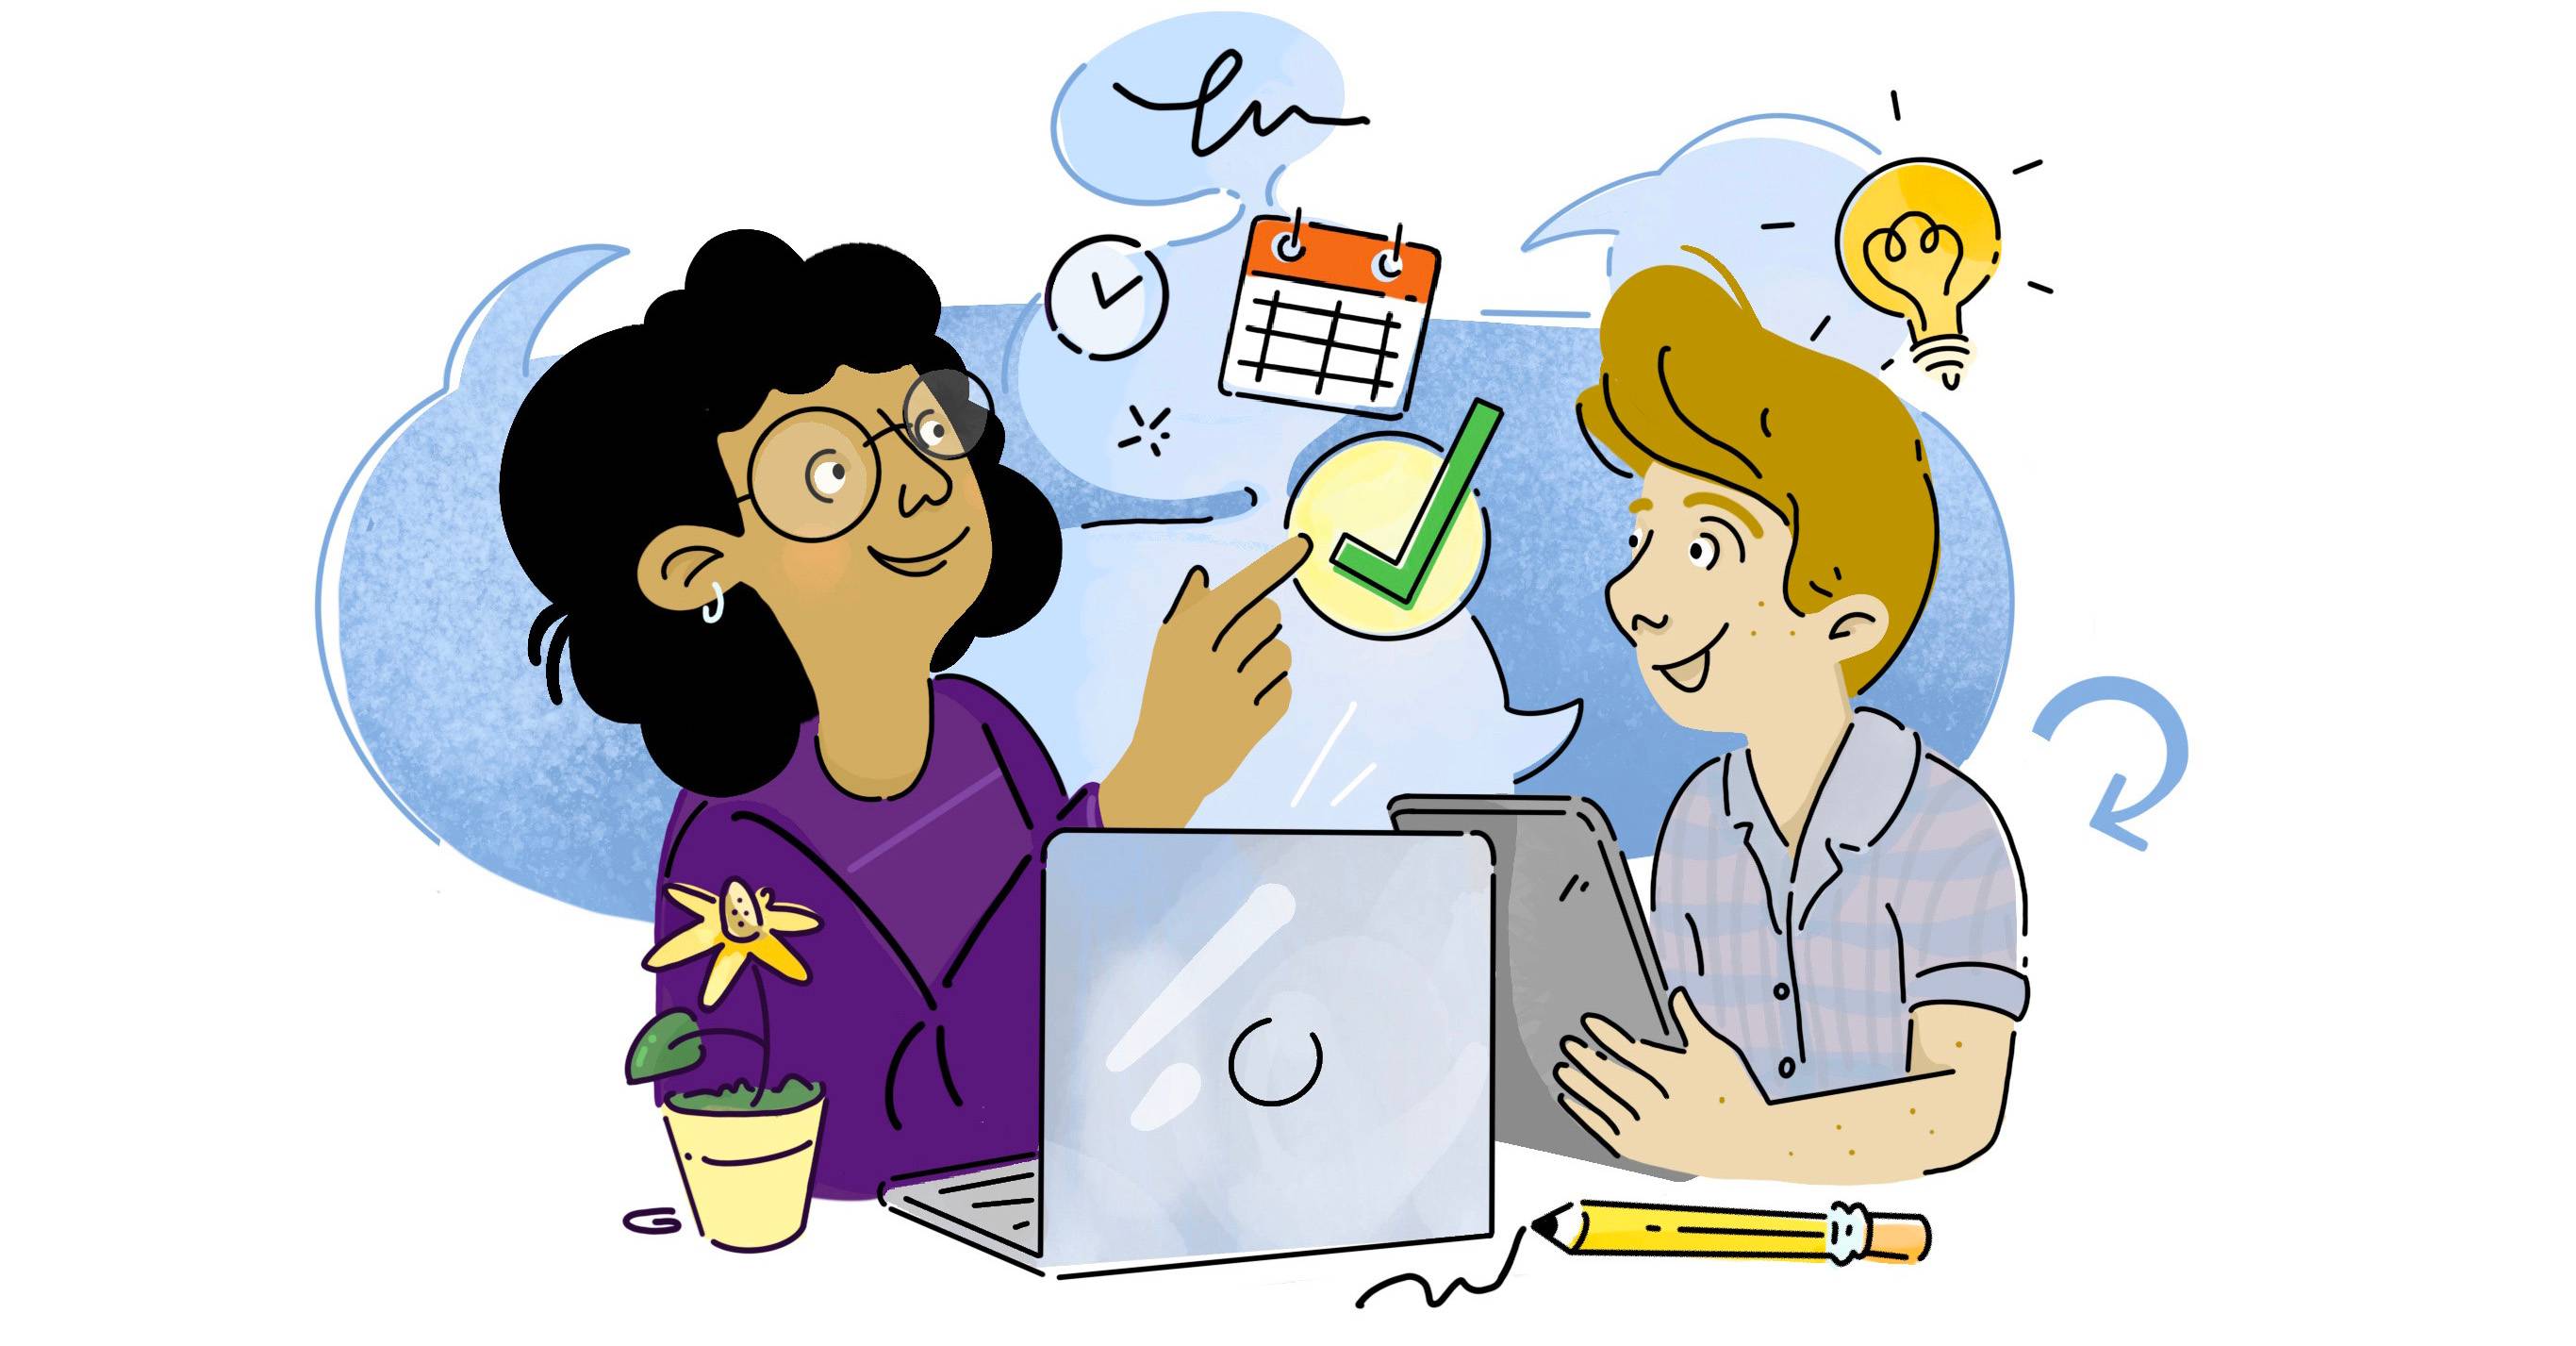 Illustration of a manager and an intern discussing ideas, schedules, and other work.